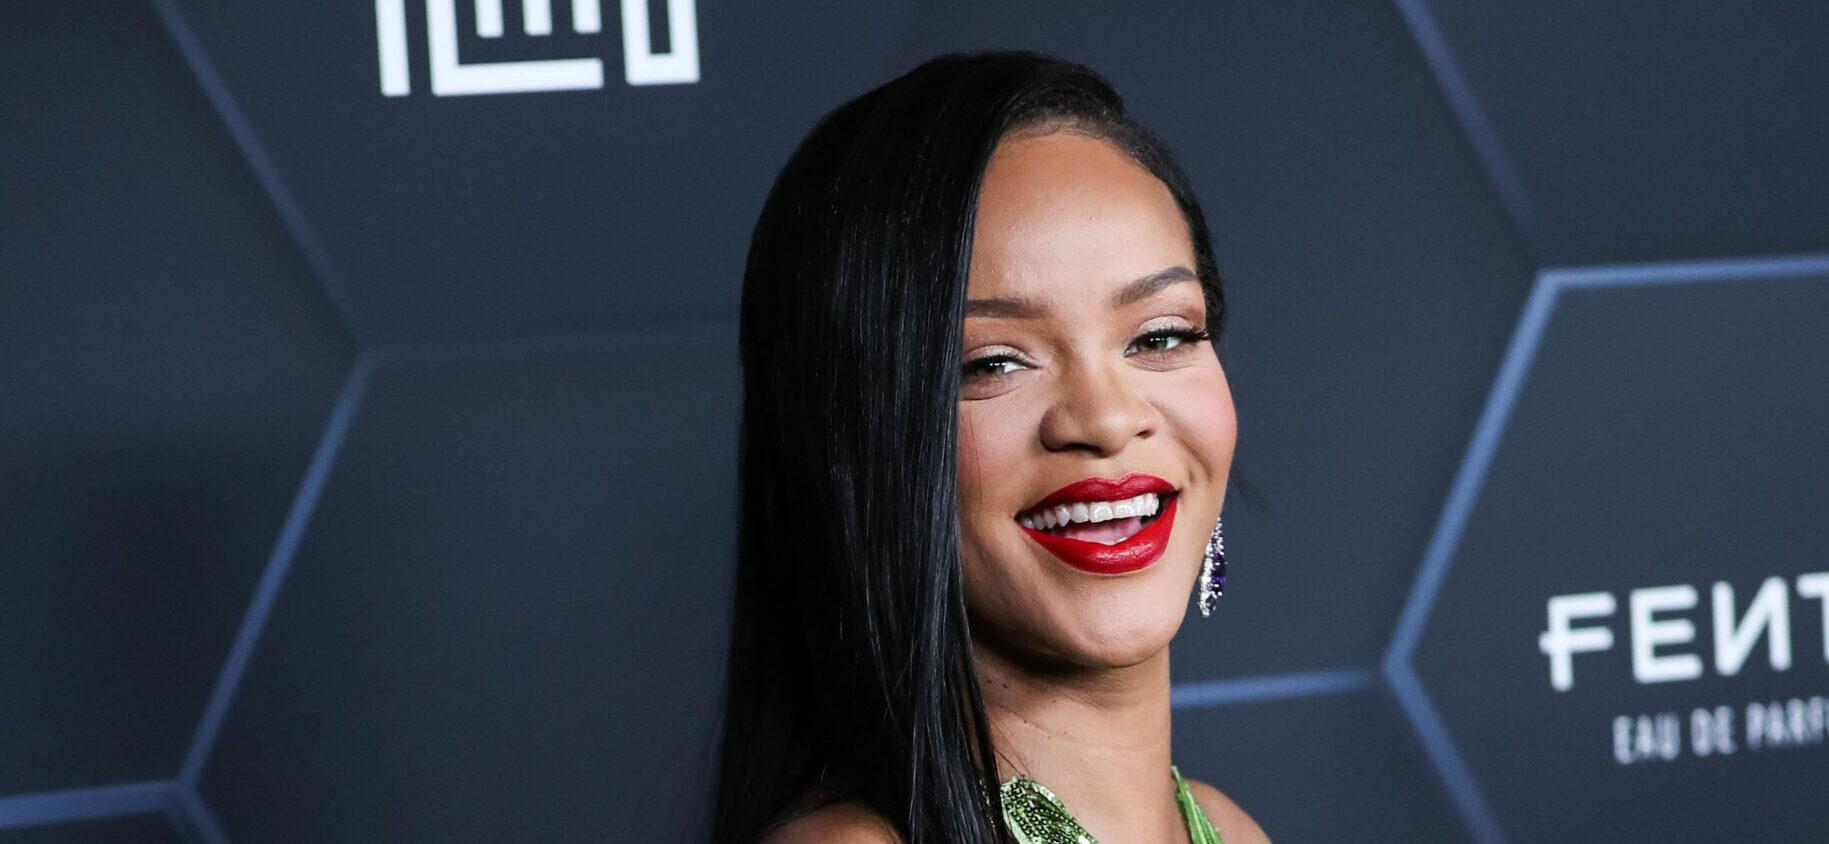 Rihanna’s Super Bowl Halftime Performance Compared To Porn In FCC Complaints